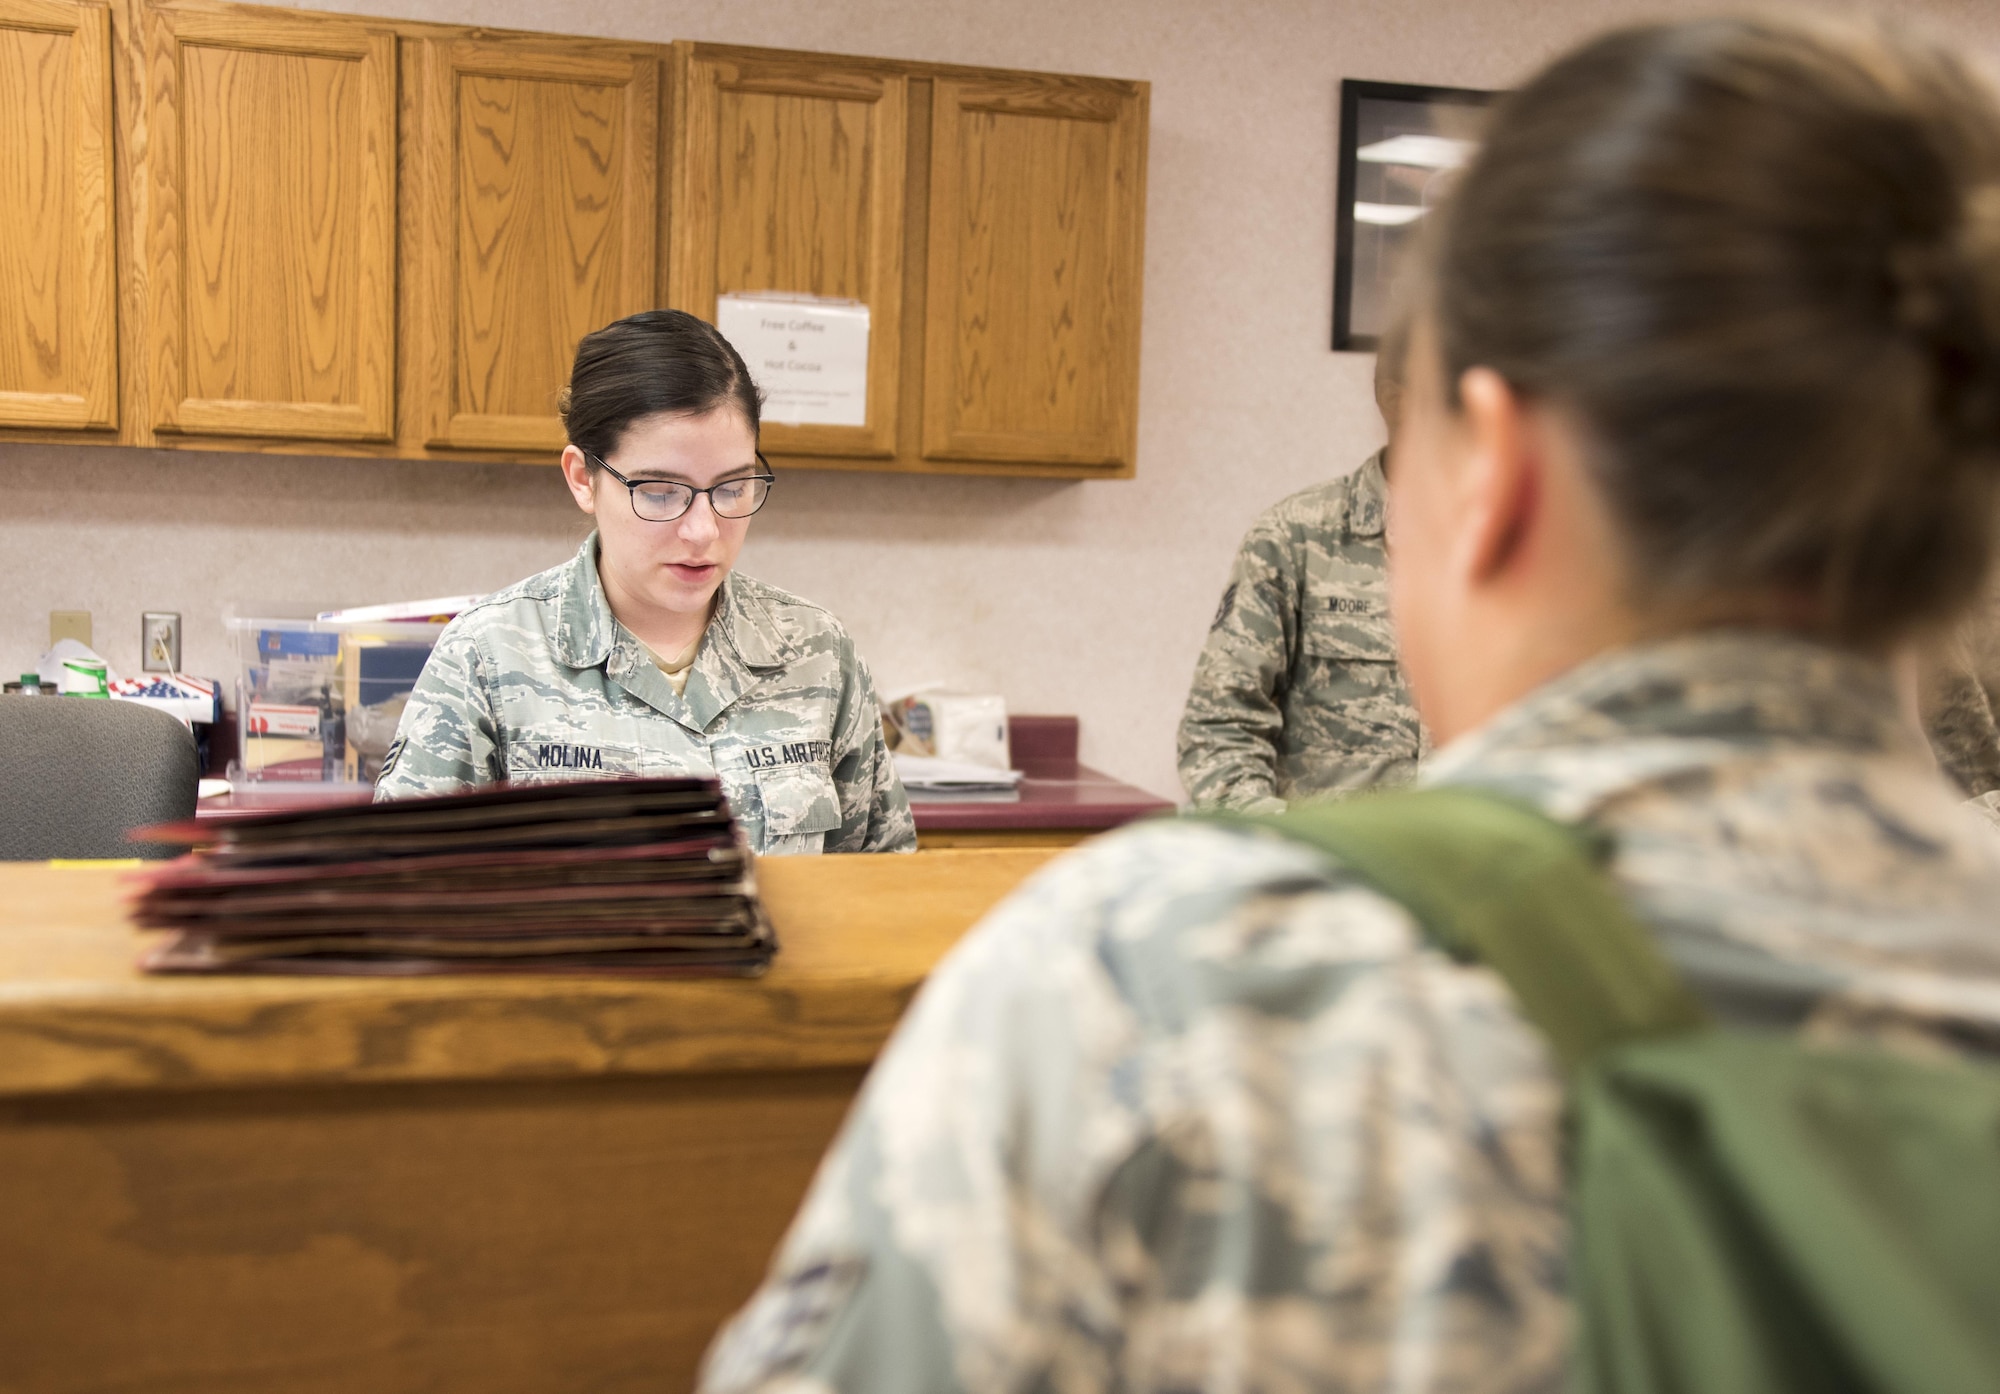 Senior Airman Natalie Molina, 4th Force Support Squadron, reviews a deployer’s mobility folder at the PDF processing center July 20, 2017, at Seymour Johnson Air Force Base, North Carolina. The pre-deployment processing was to ensure the deployers had all necessary documents and gear prior to departing. (U.S. Air Force photo by Tech. Sgt. David W. Carbajal)